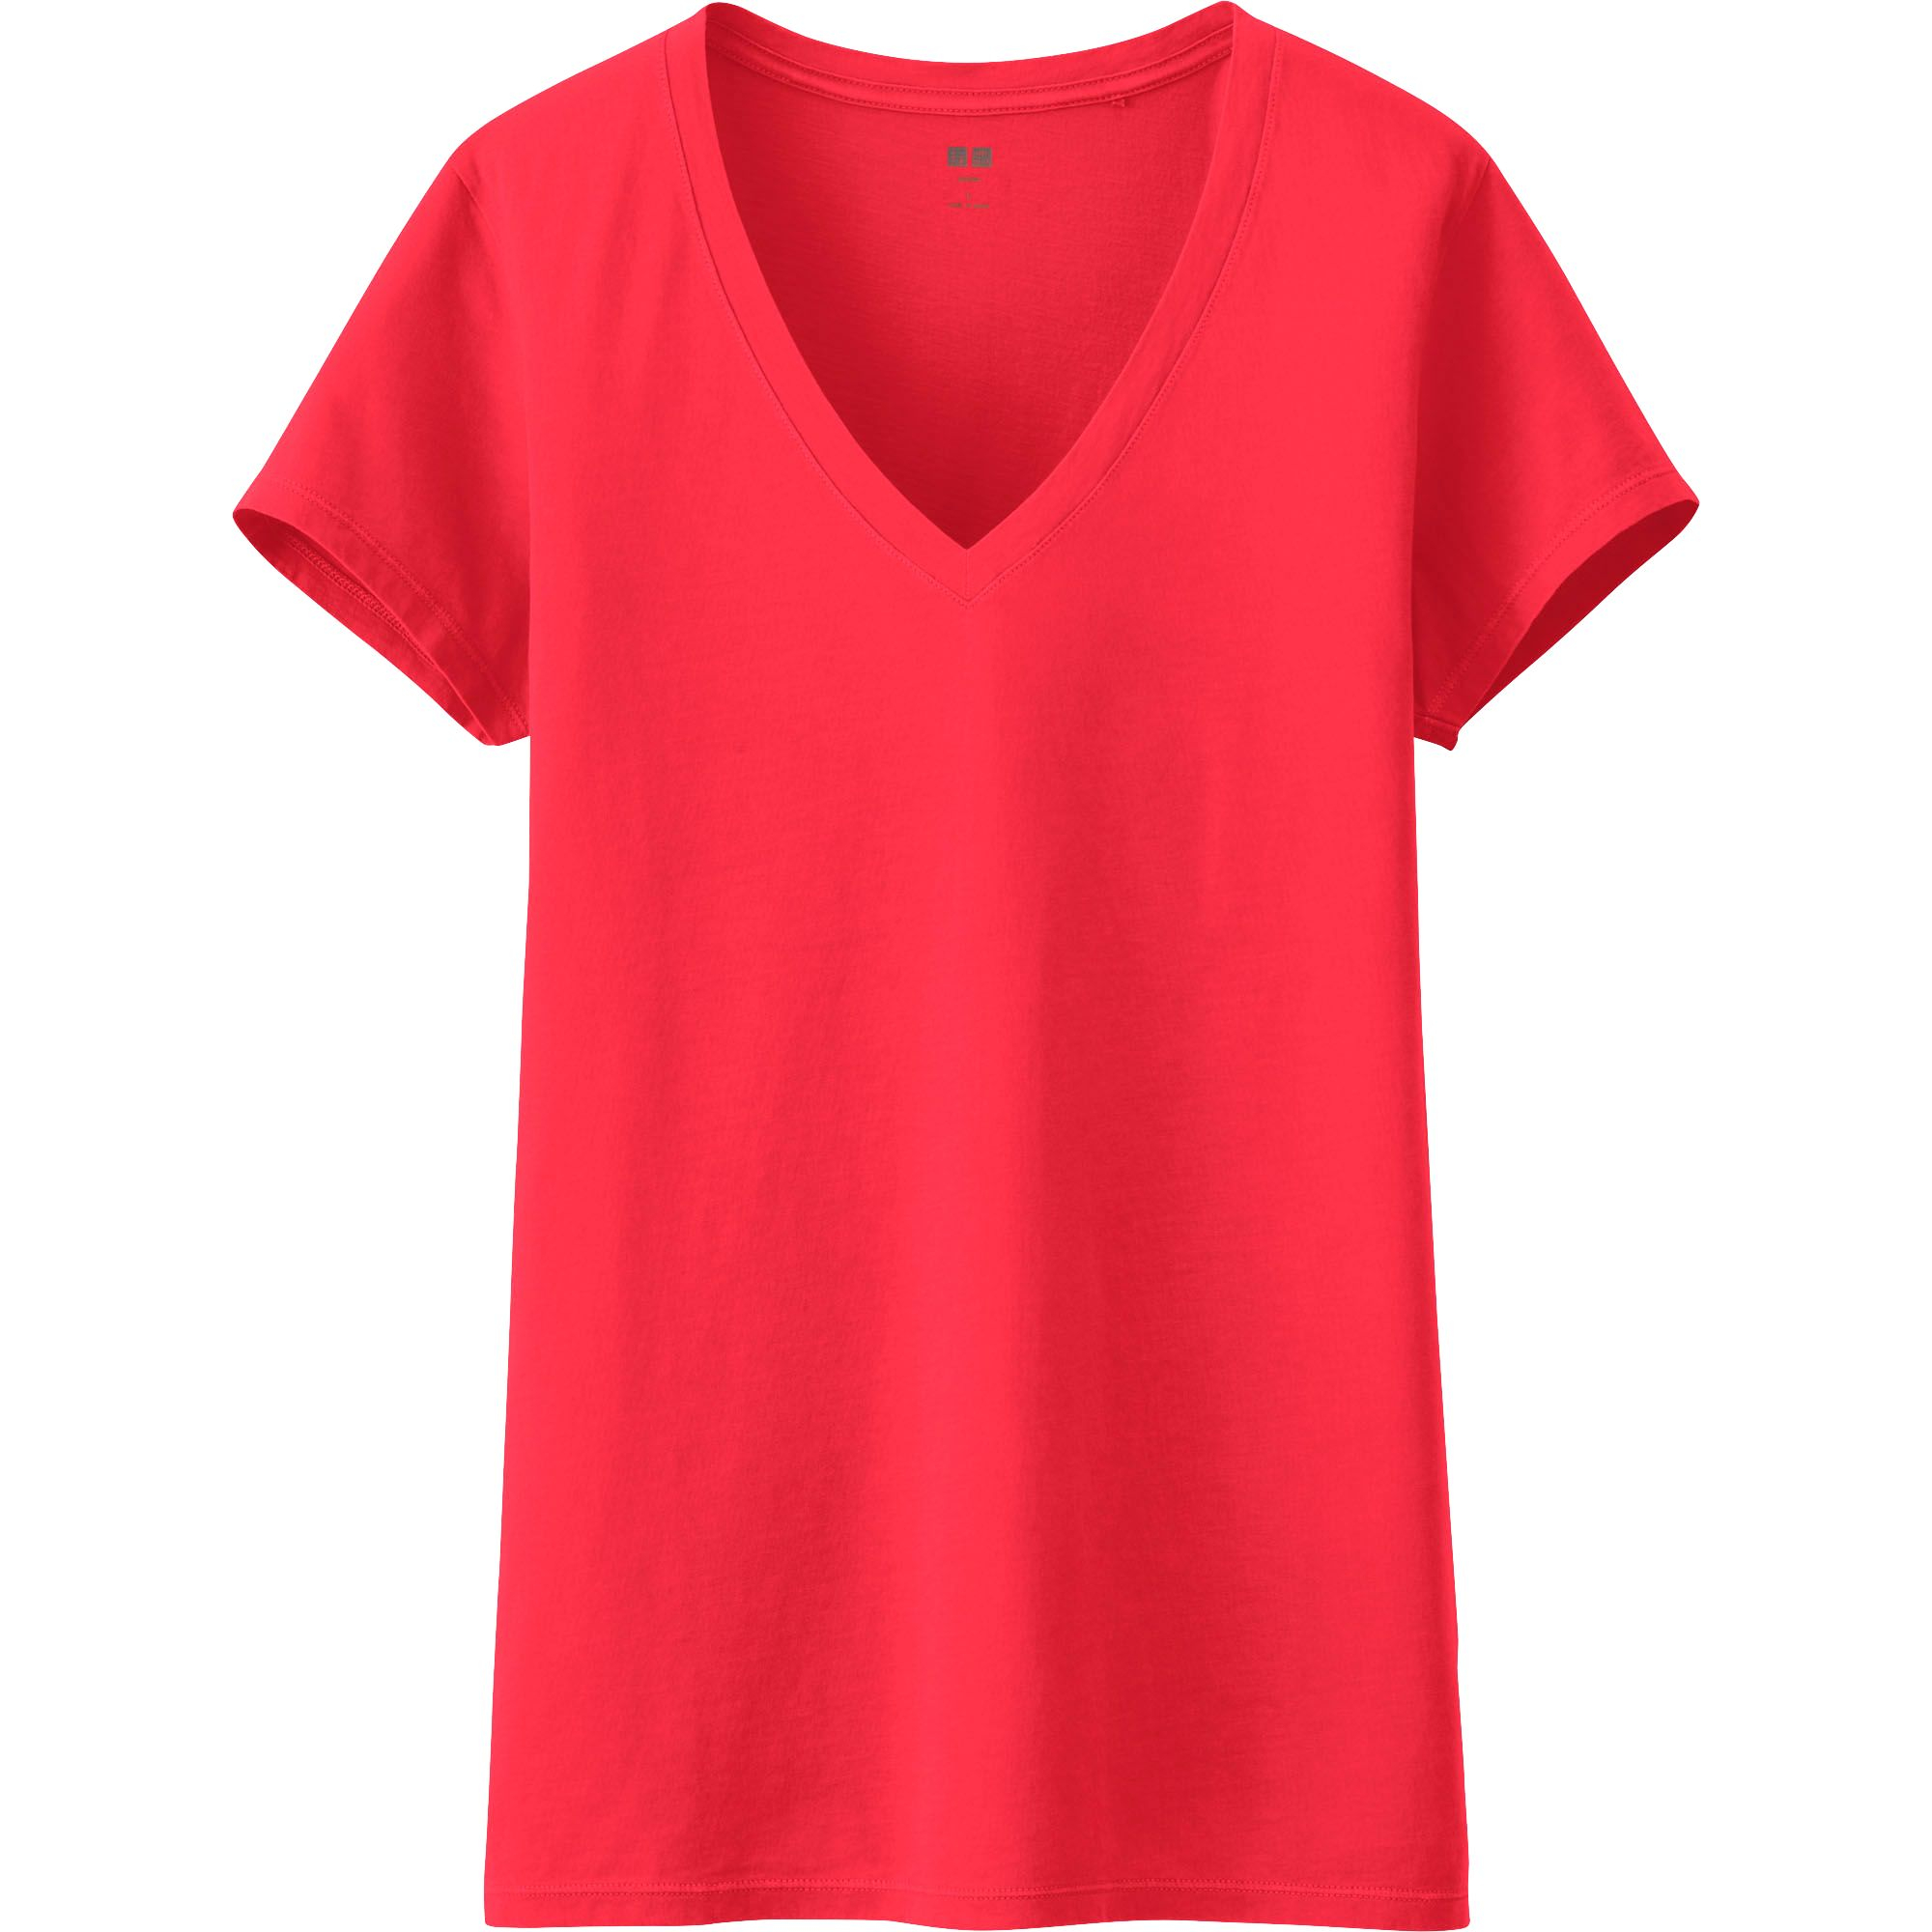 Uniqlo Women Supima Cotton Washed V Neck Short Sleeve T-shirt in Red | Lyst